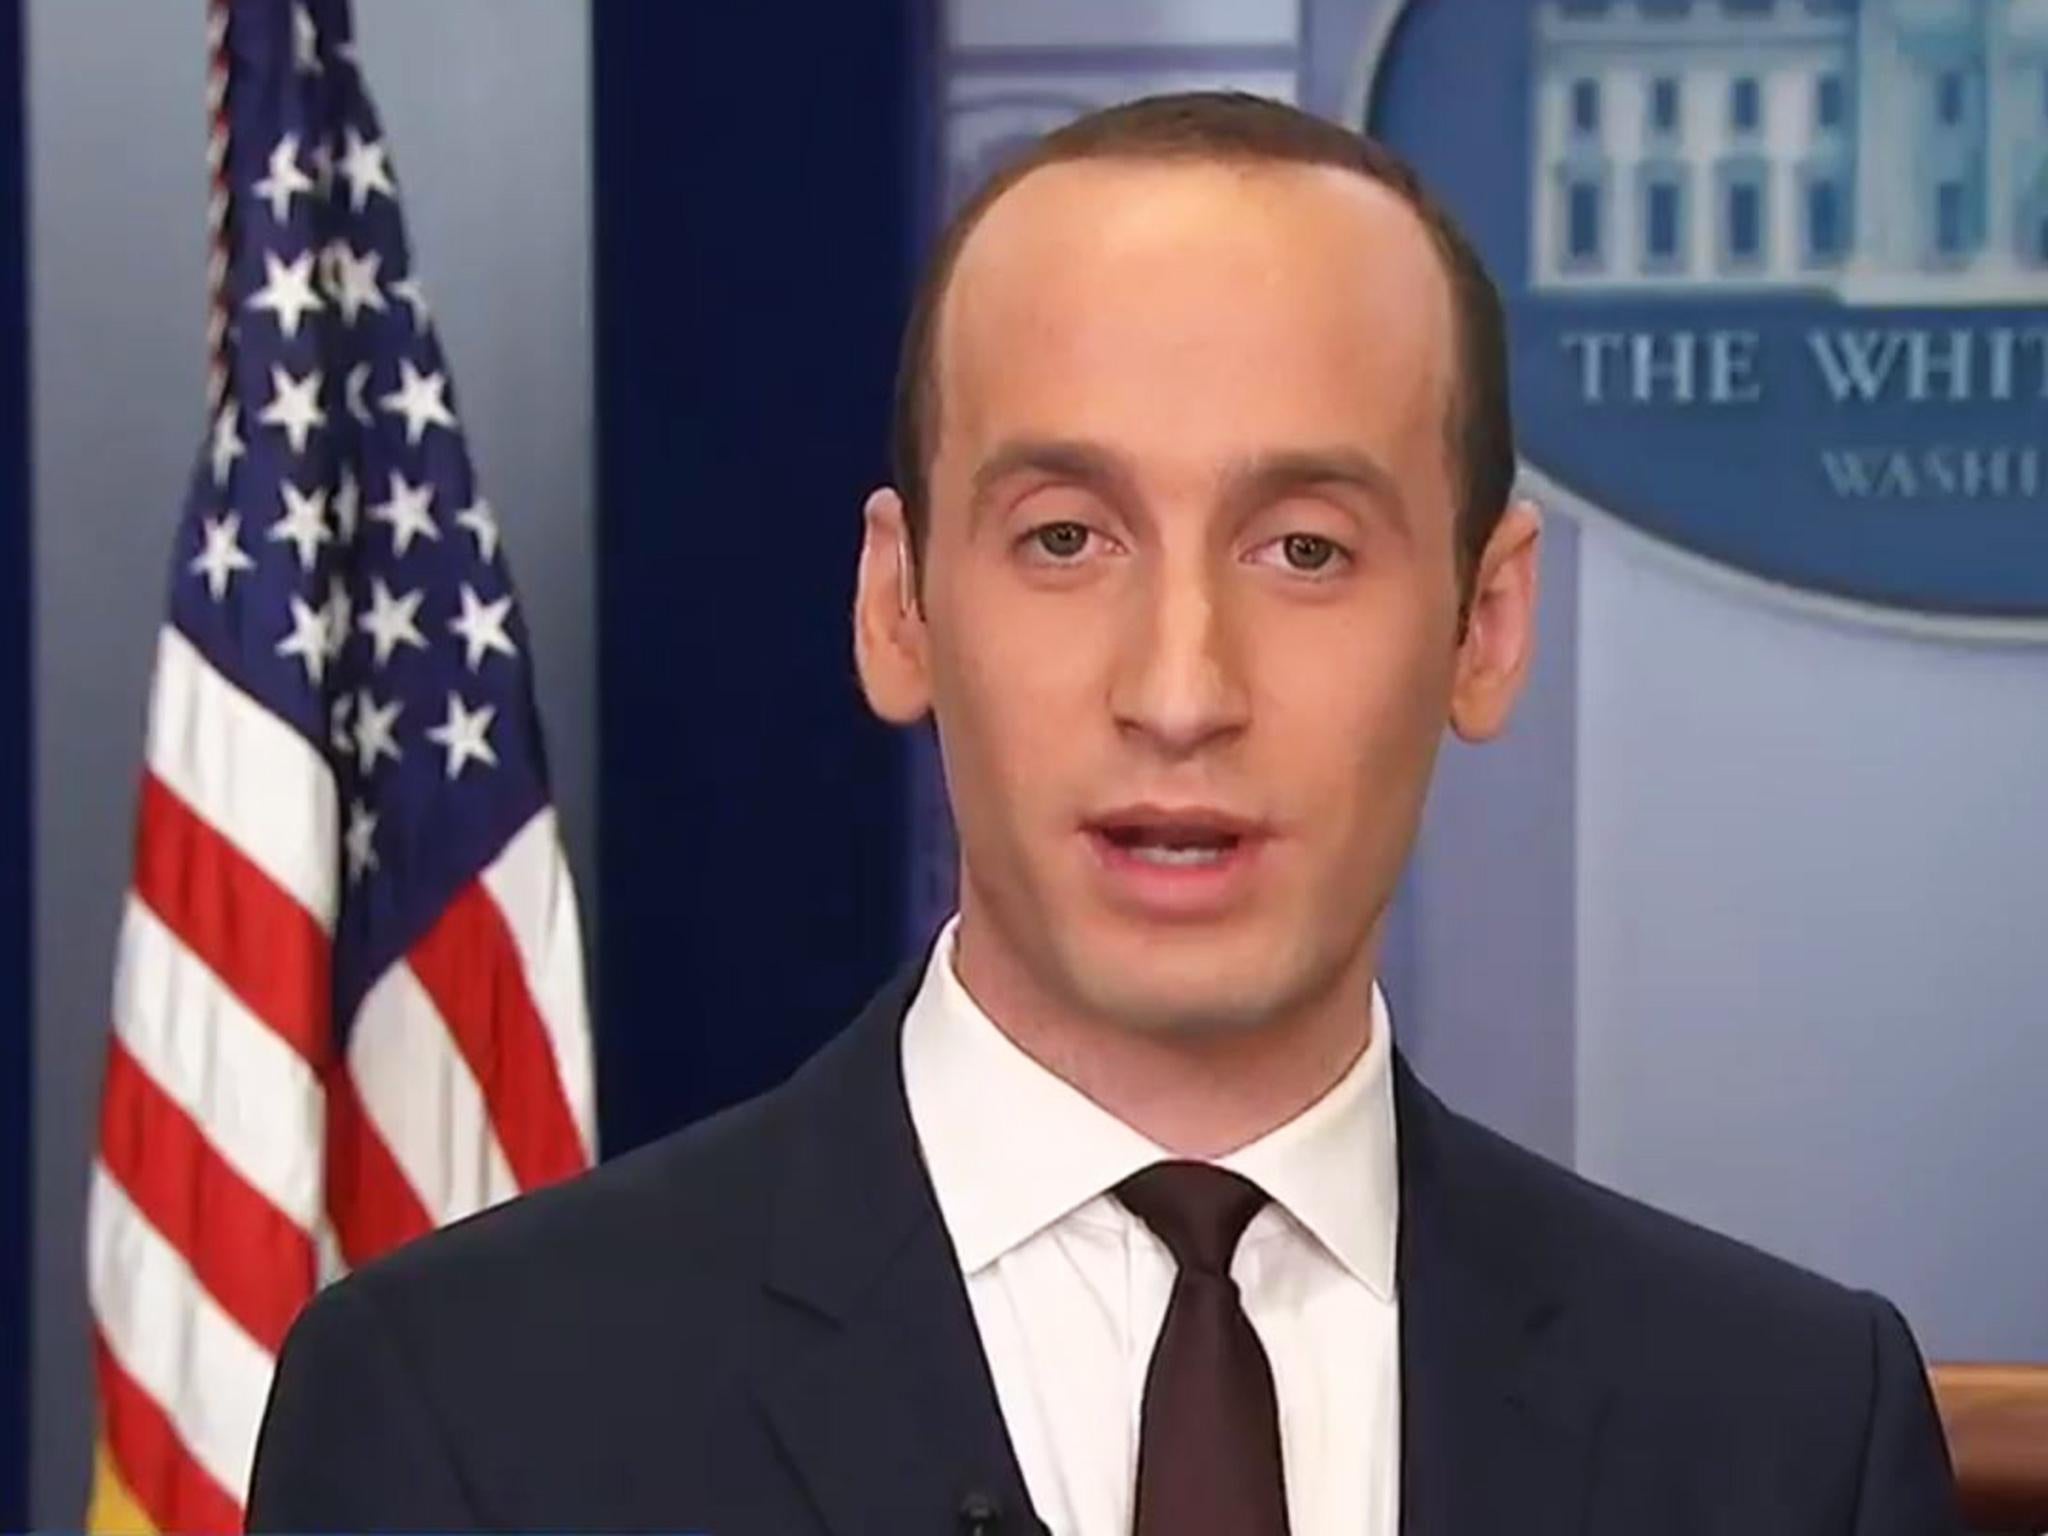 Stephen Miller blamed the 'Deep State' on Fox News over the weekend